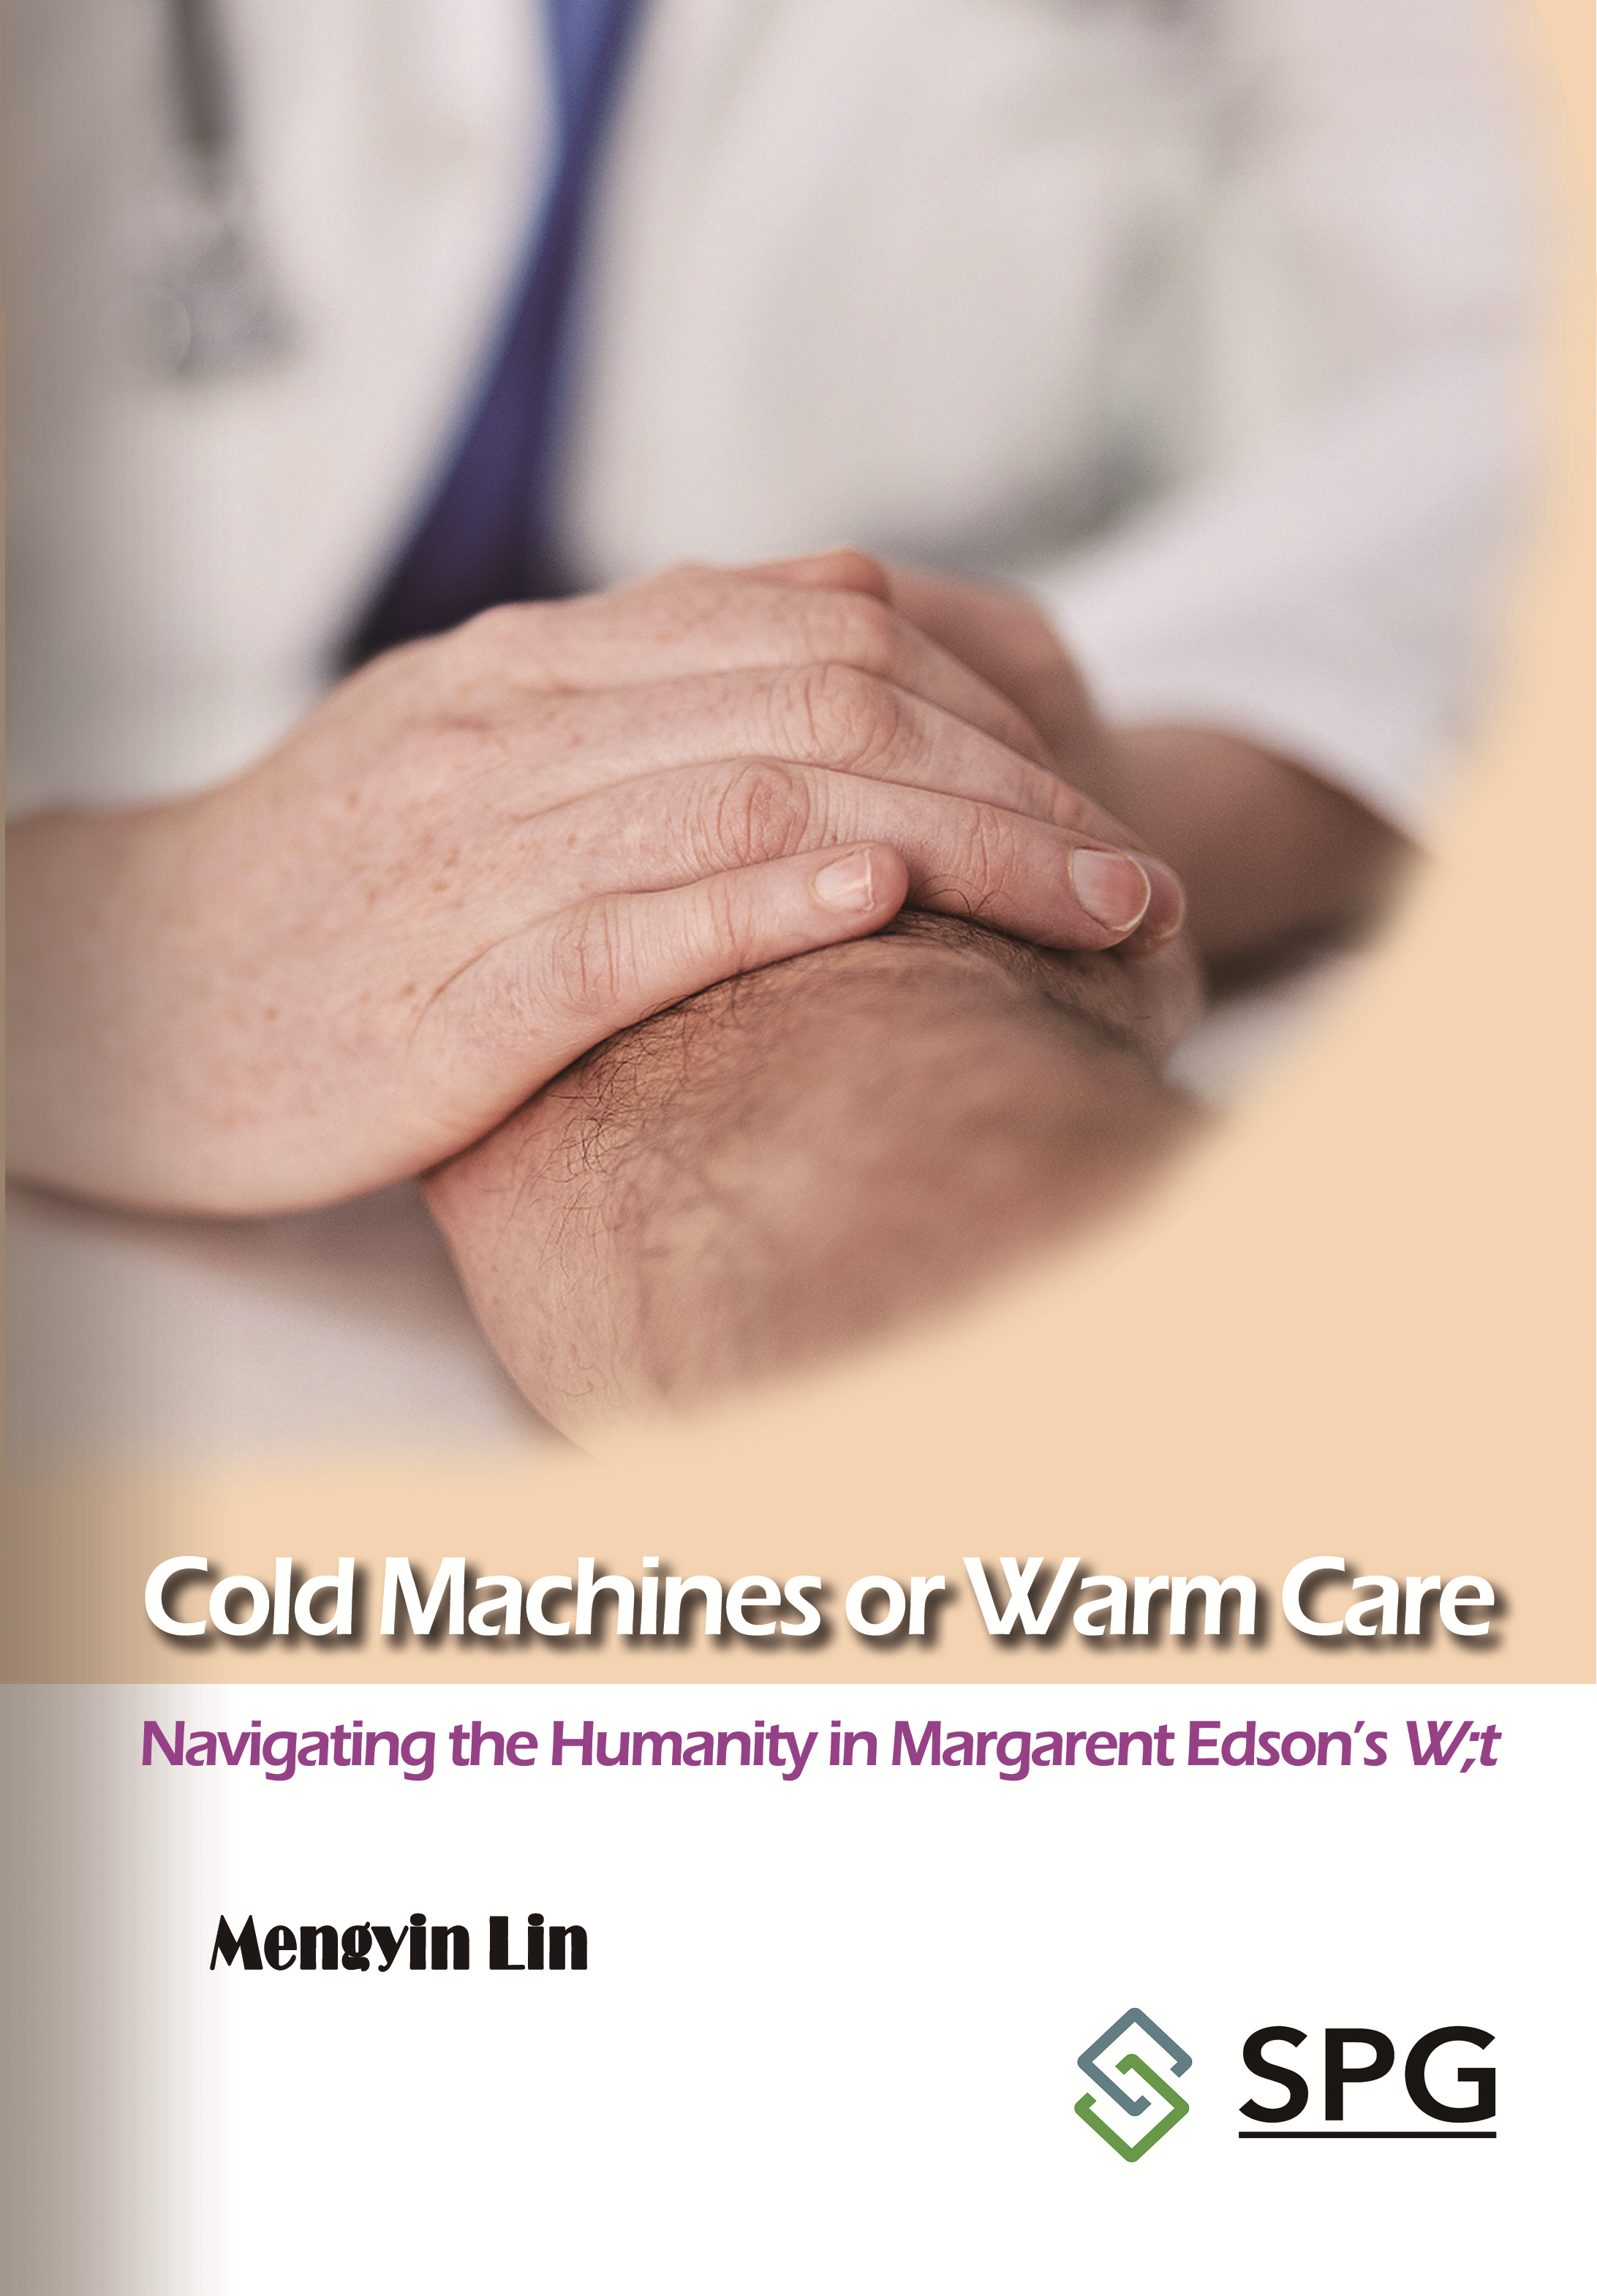 Cold Machines or Warm Care: Navigating the Humanity in Margarent Edson’s W;t | Scholar Publishing Group